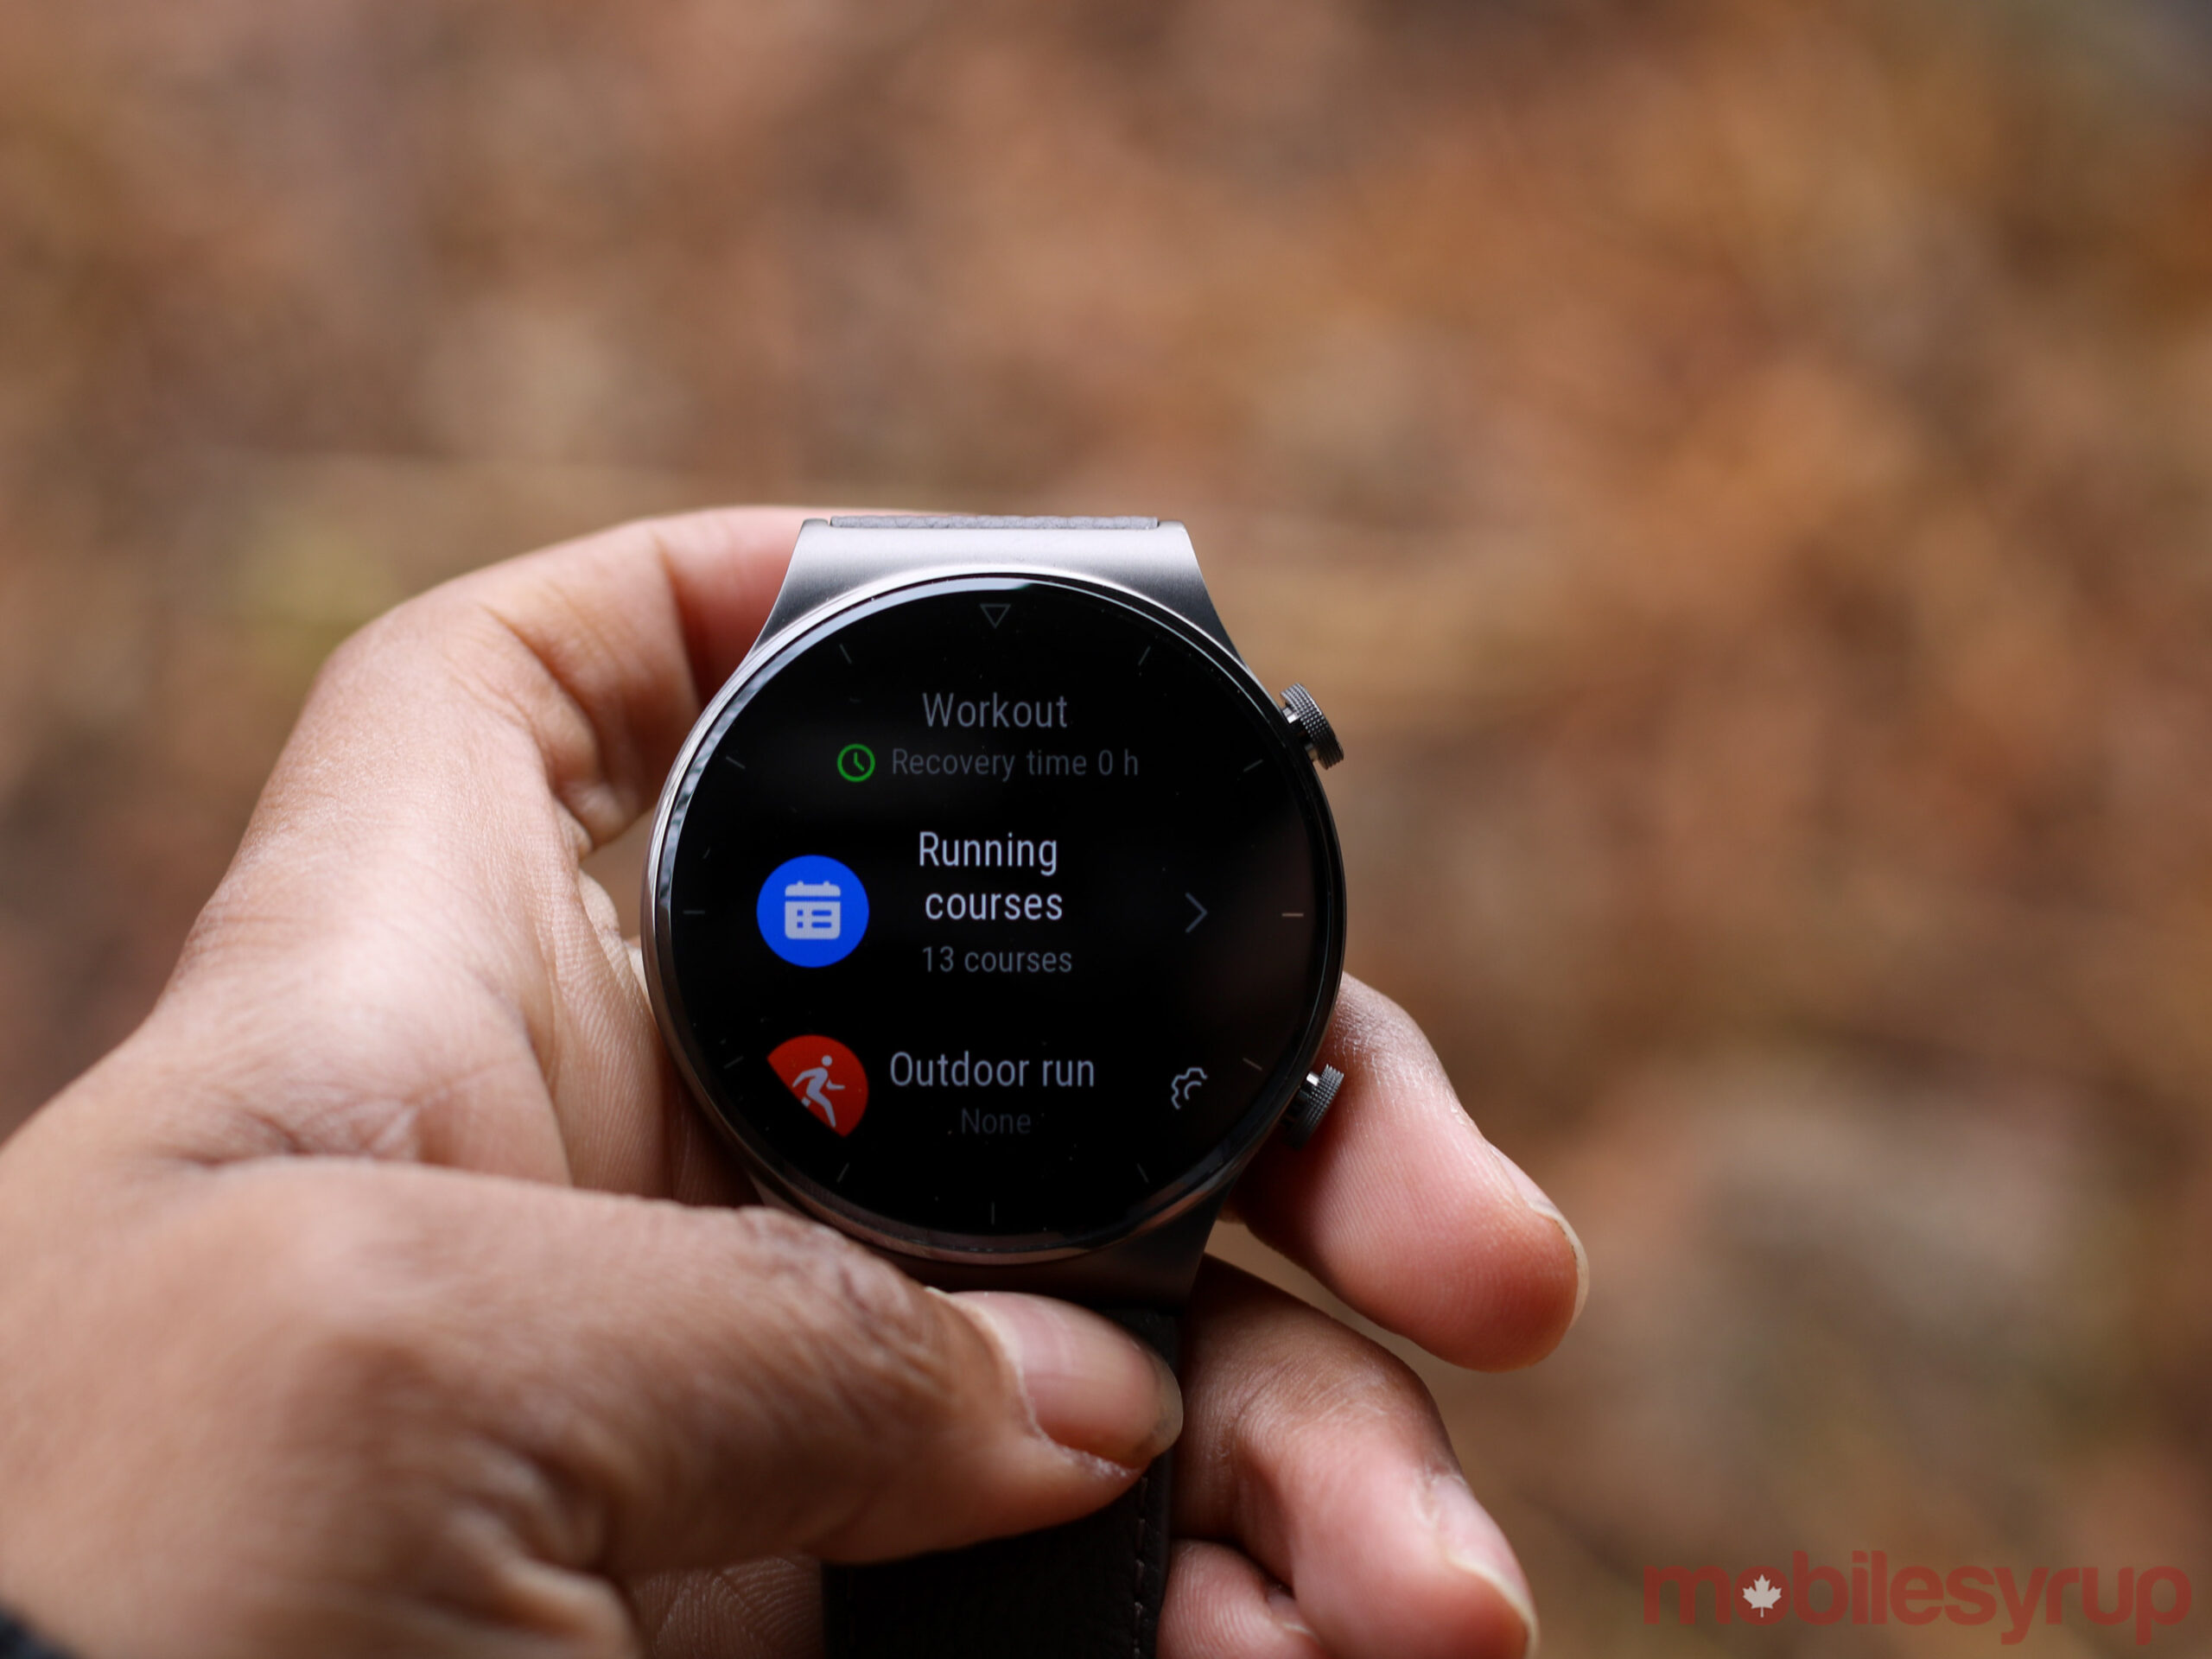 Huawei's Watch GT 2 Pro features a bold design and is full of features